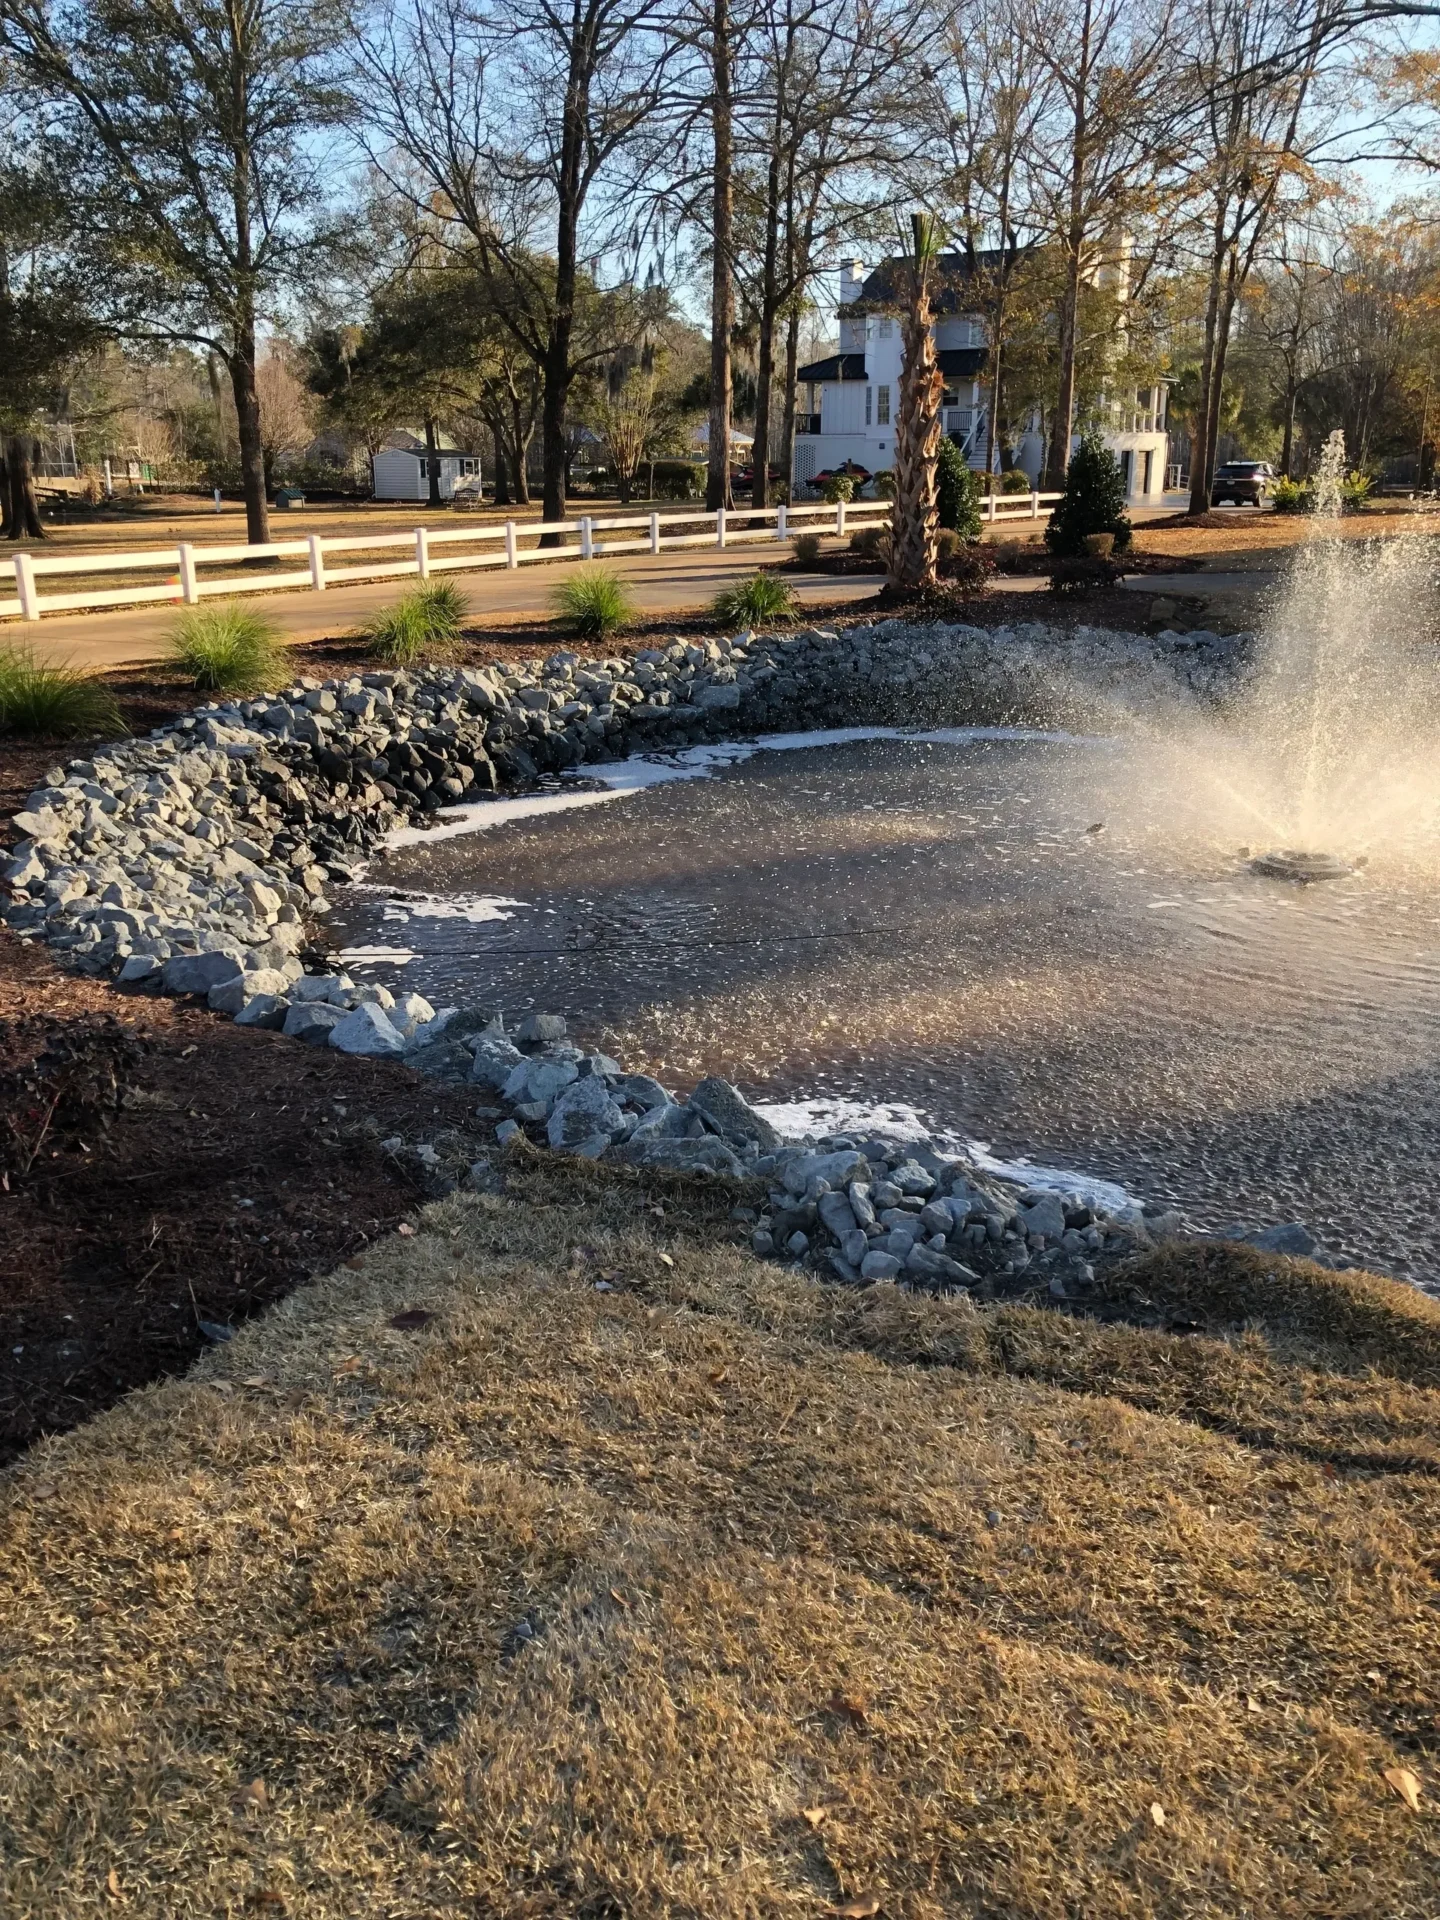 A fountain is spraying water into the ground.